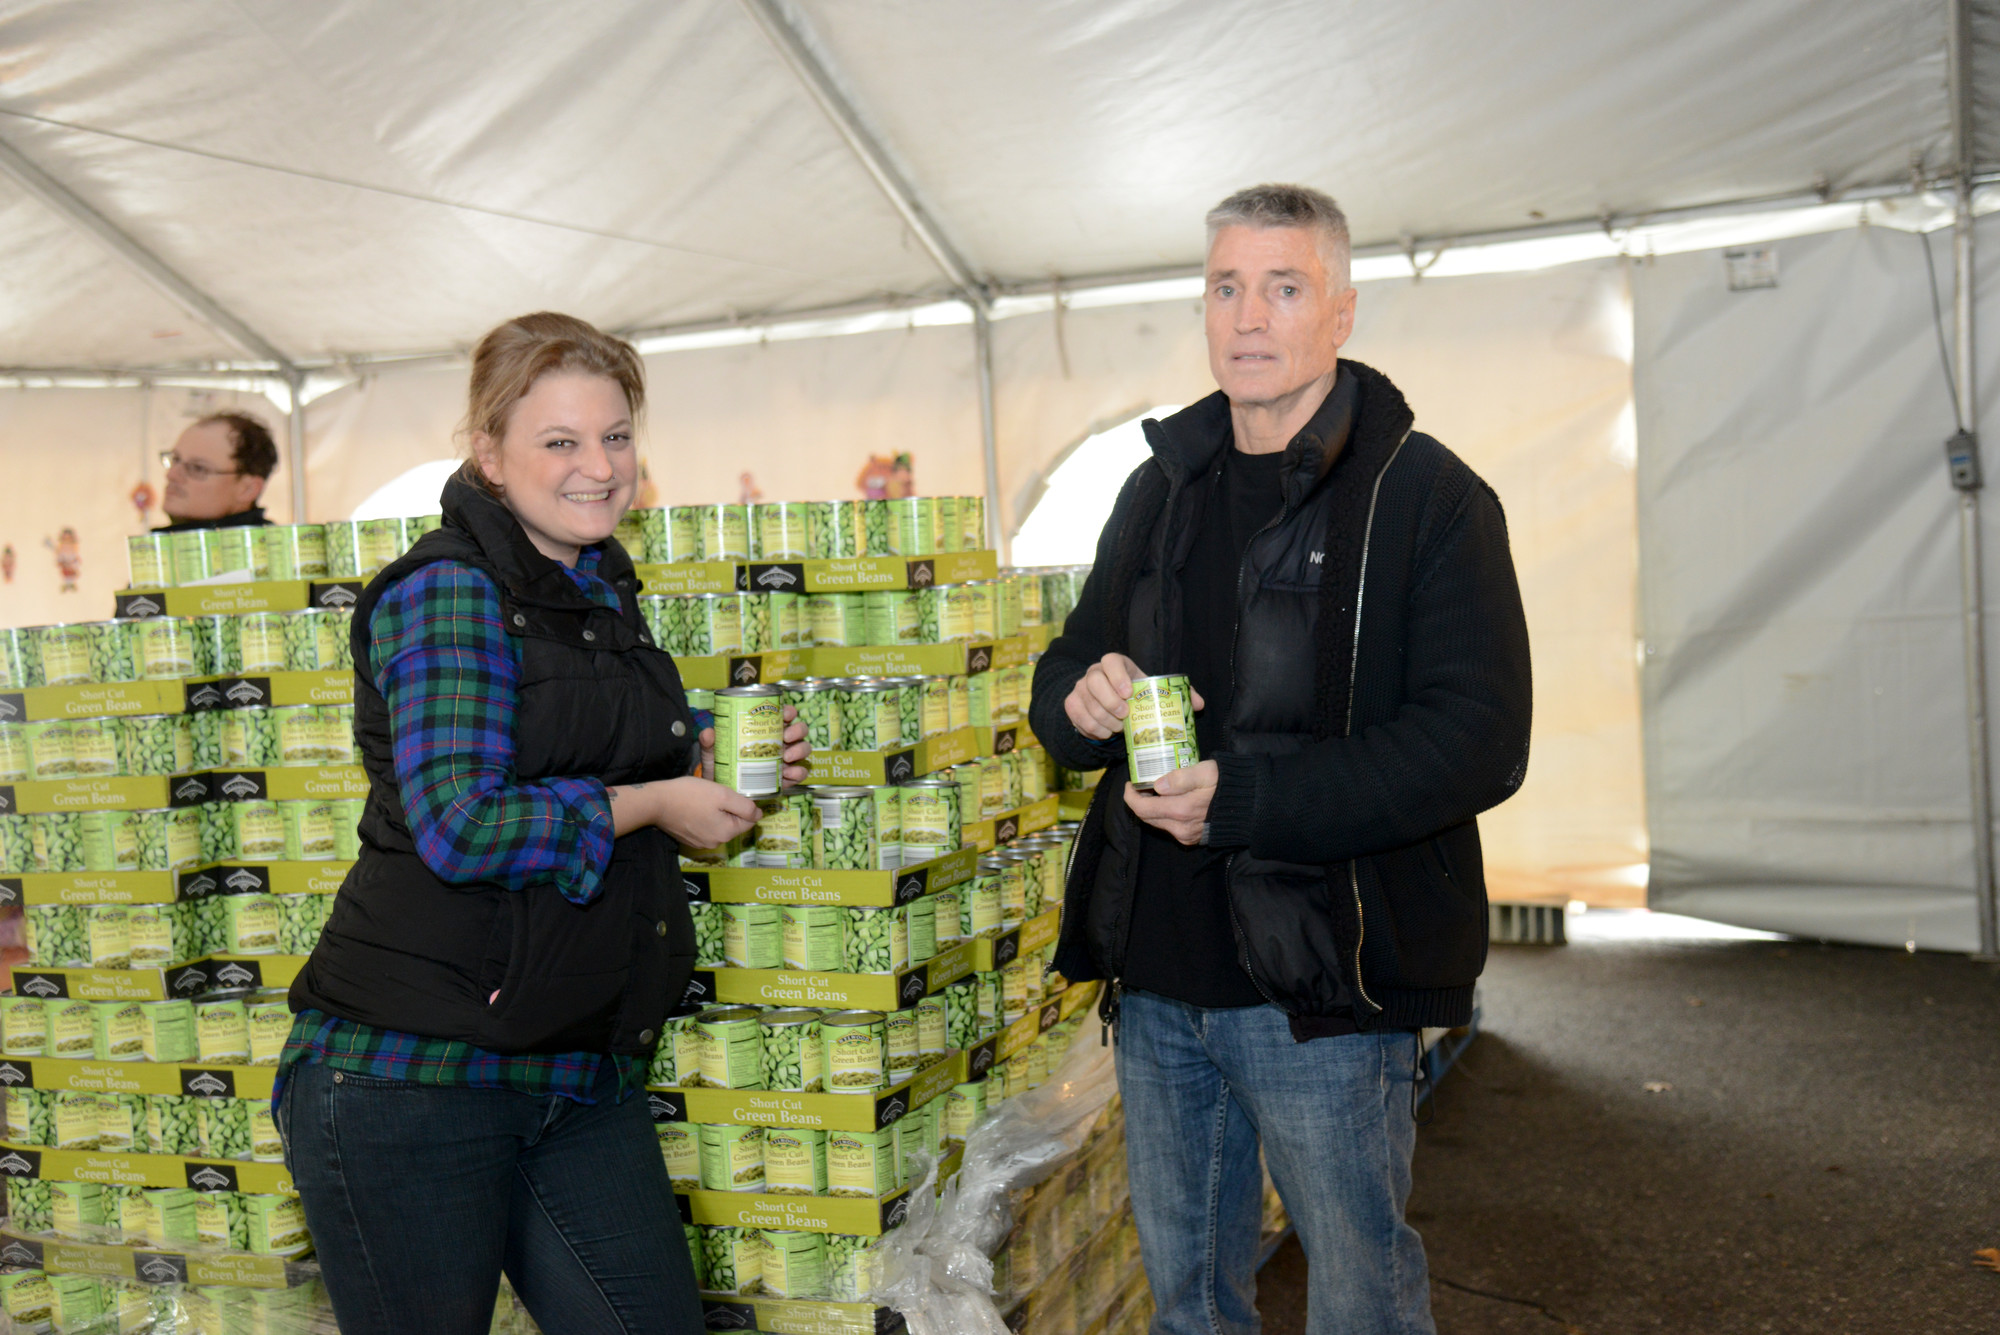 At left, Mid-Island Employee Nicole Tirino Wilke and organizer Robert Jesberger with just one of the many pallets of food he purchased.